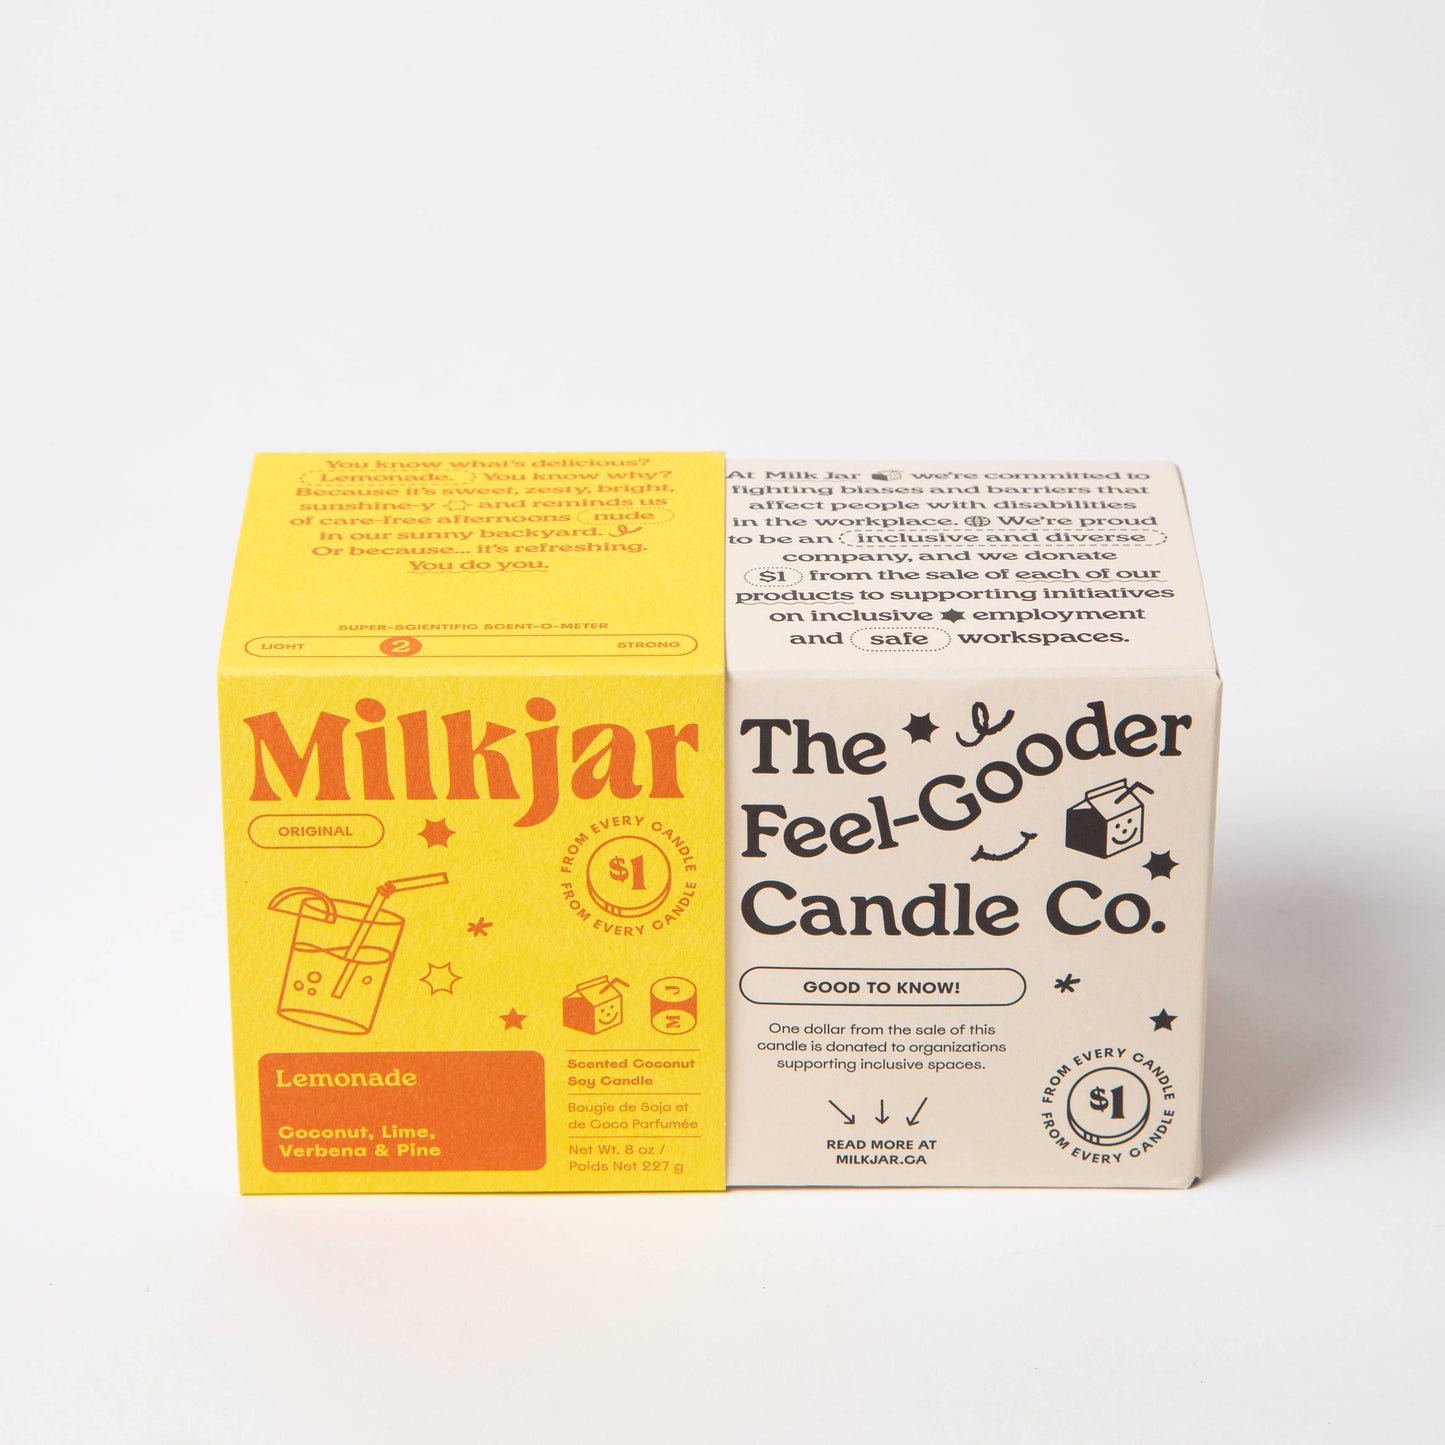 Milk Jar Candle Co. Lemonade Scented Candle - Osmology Scented Candles & Home Fragrance